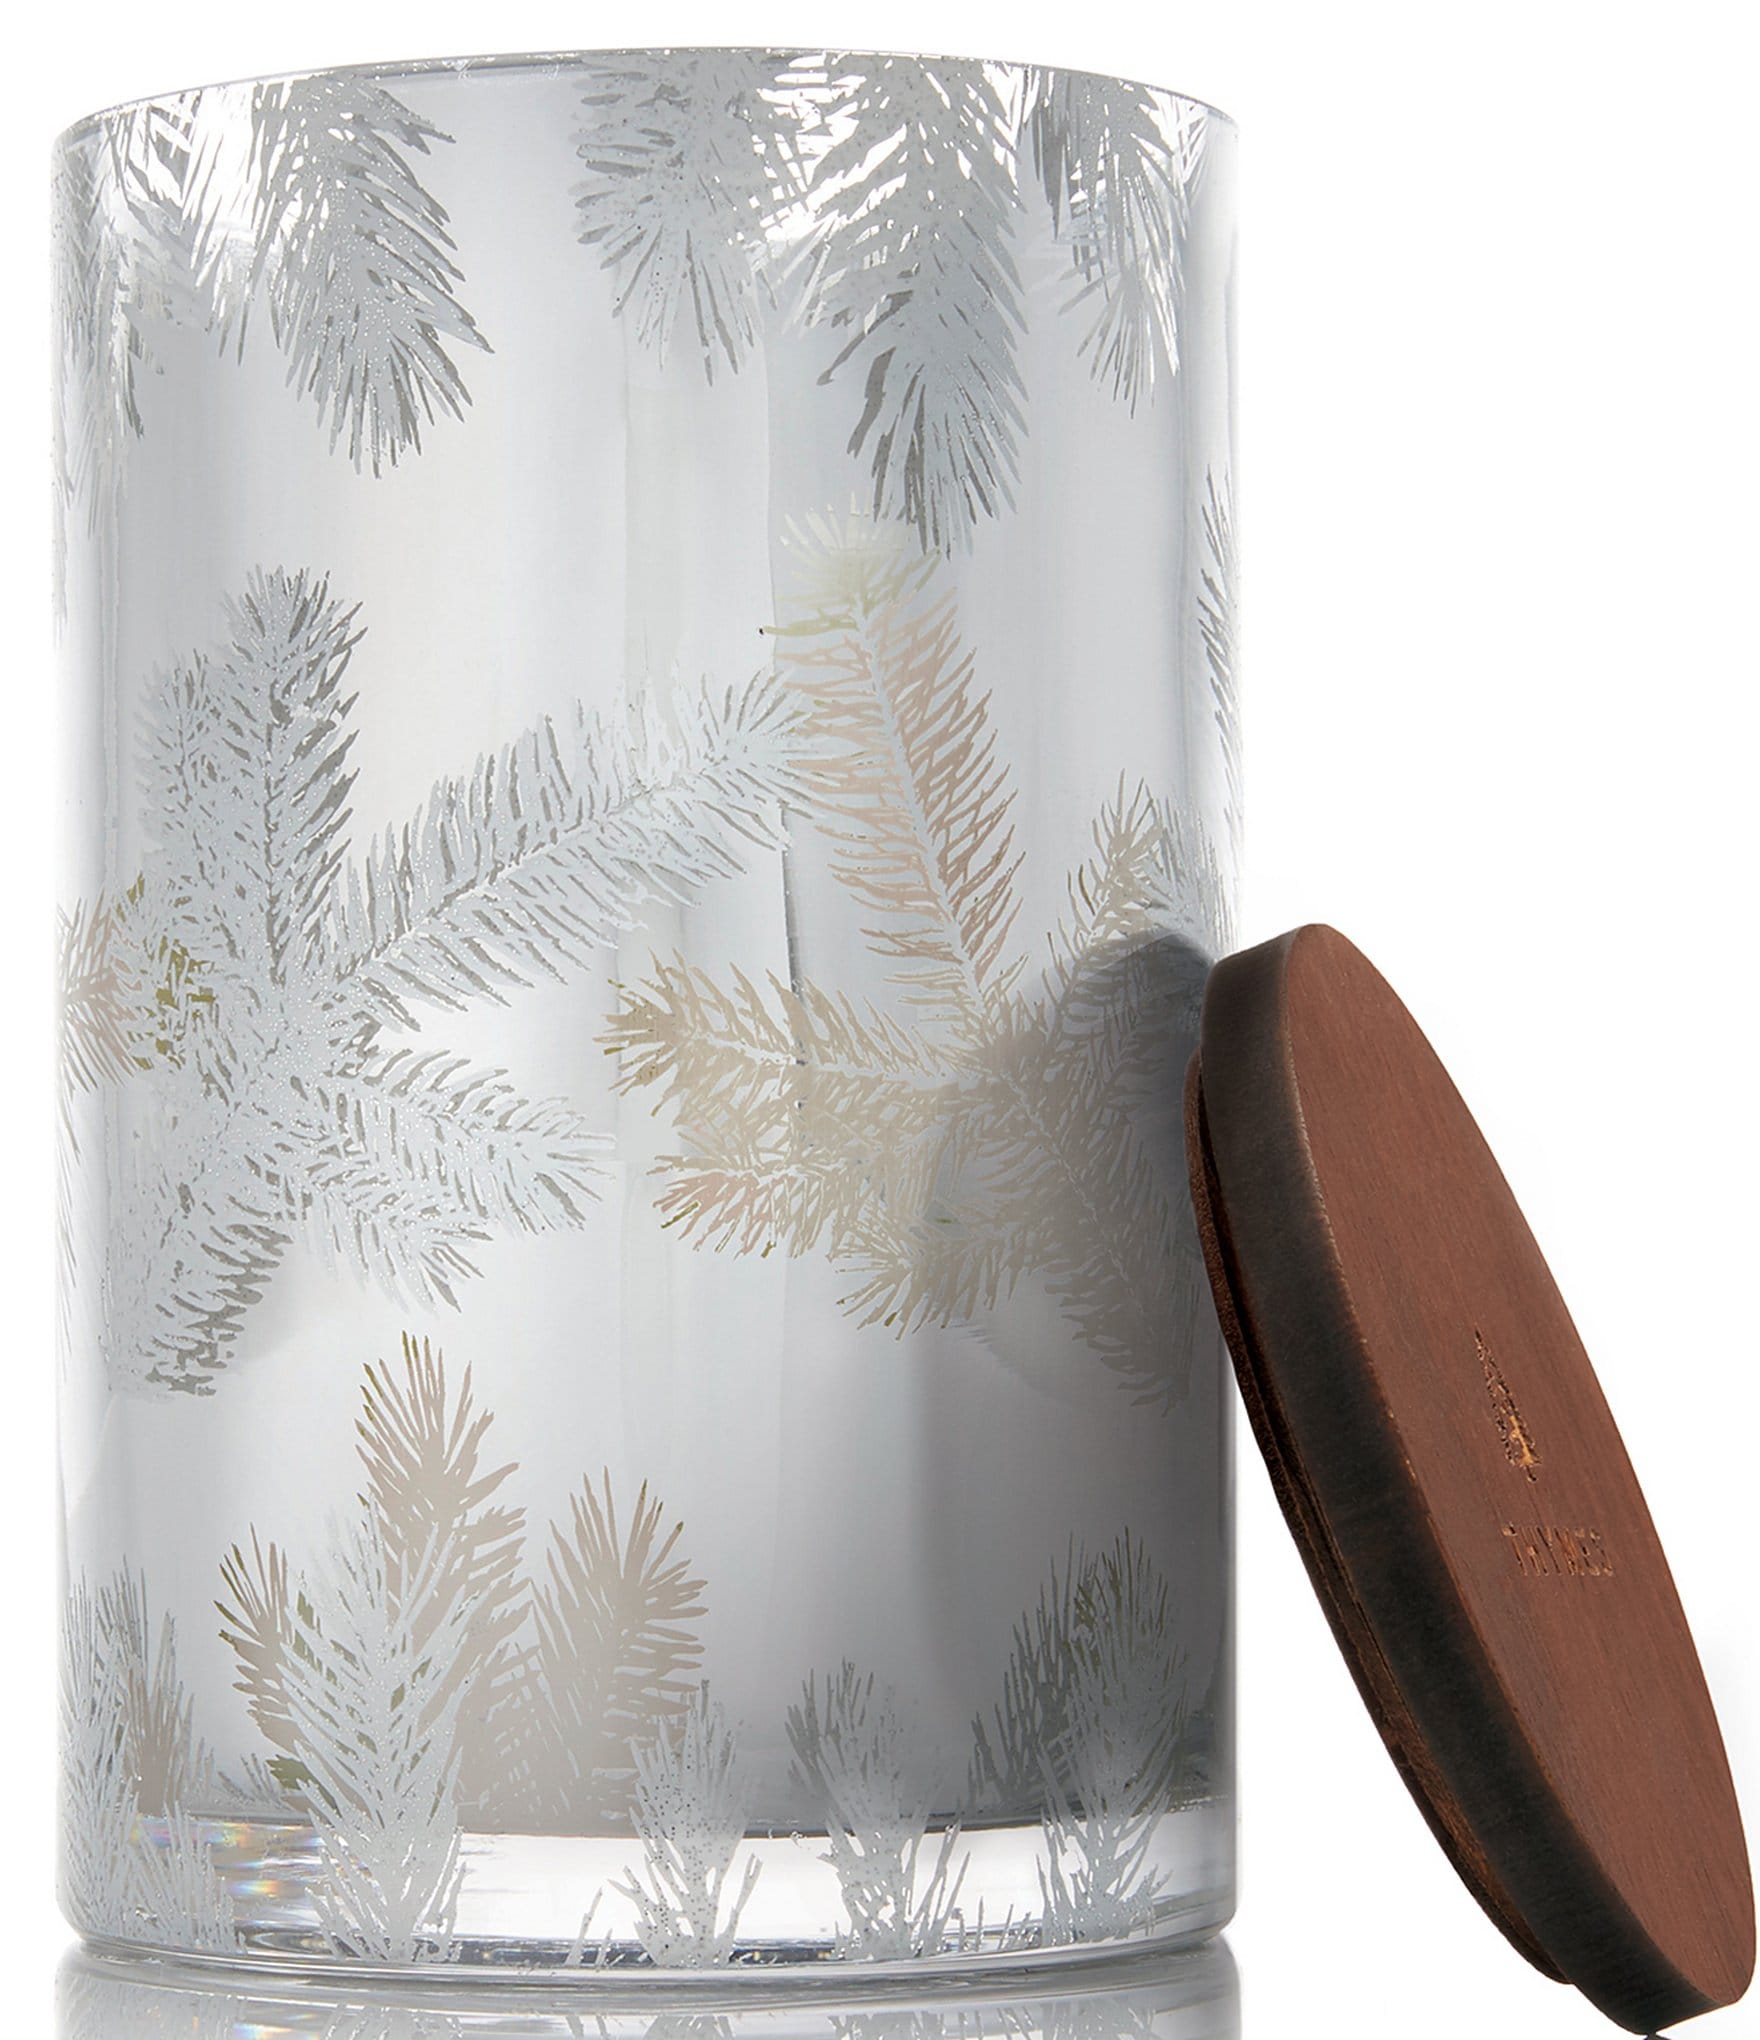 Buy Thymes Frasier Fir in Canada  Heavenly Outhouse – Tagged Product  Type_Candle